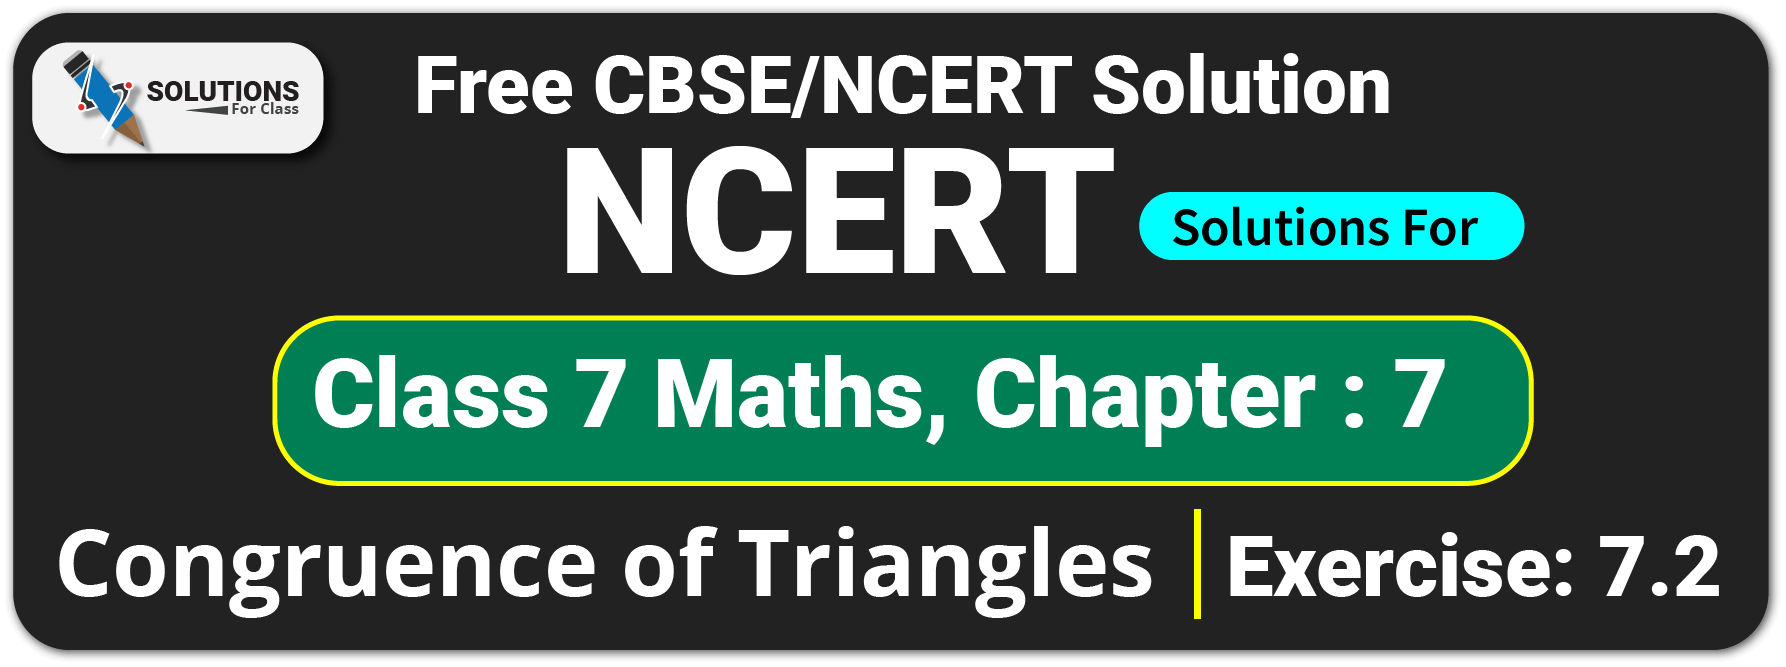 NCERT Solutions For Class 7 Maths Chapter 7, Congruence of Triangles, Exercise 7.2